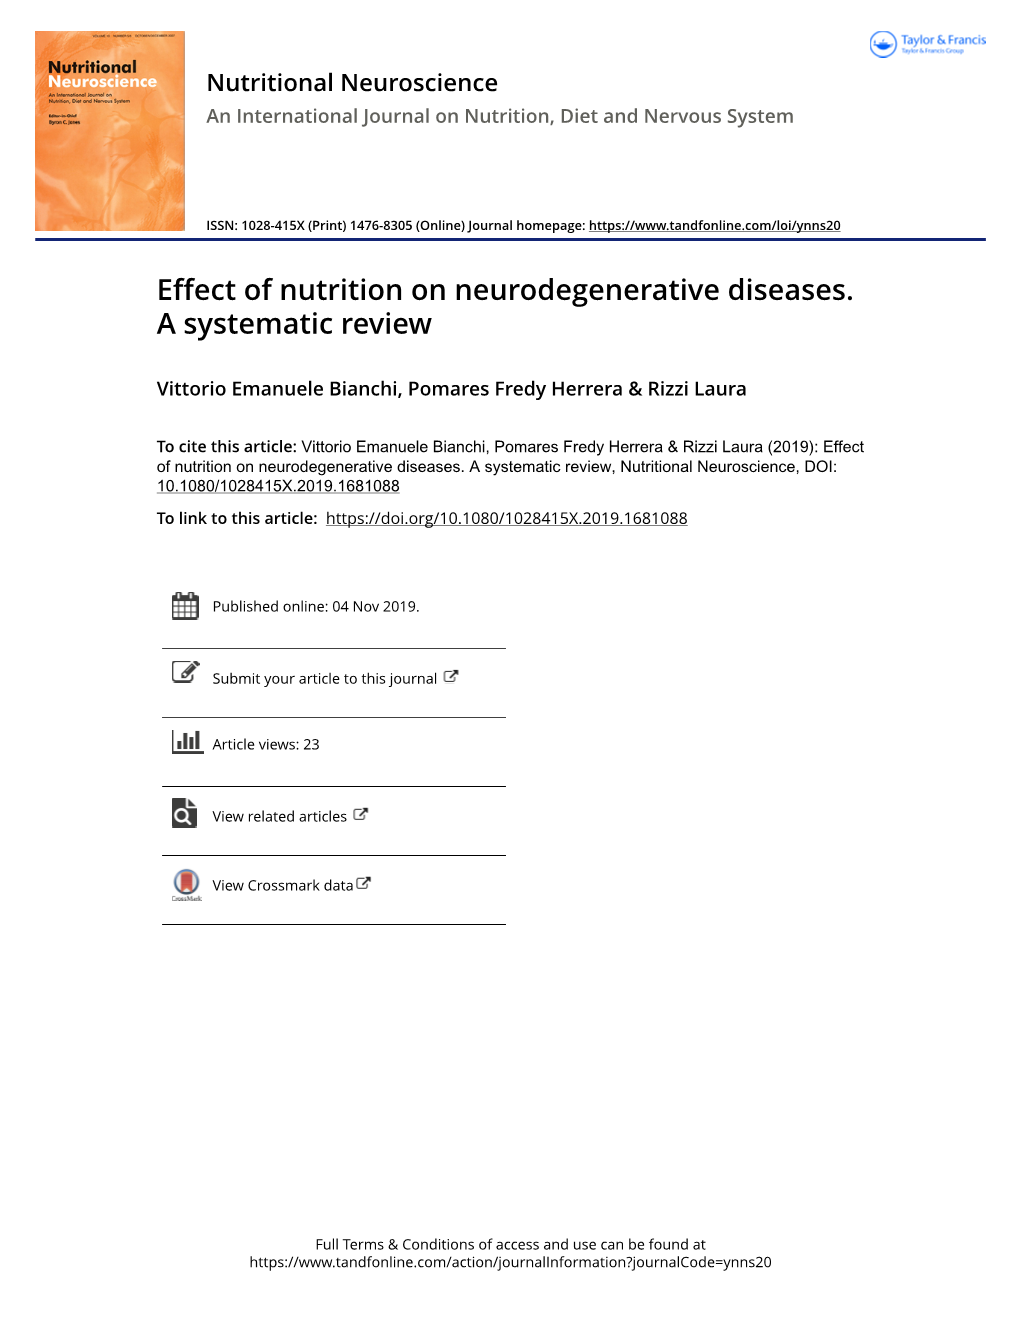 Effect of Nutrition on Neurodegenerative Diseases. a Systematic Review